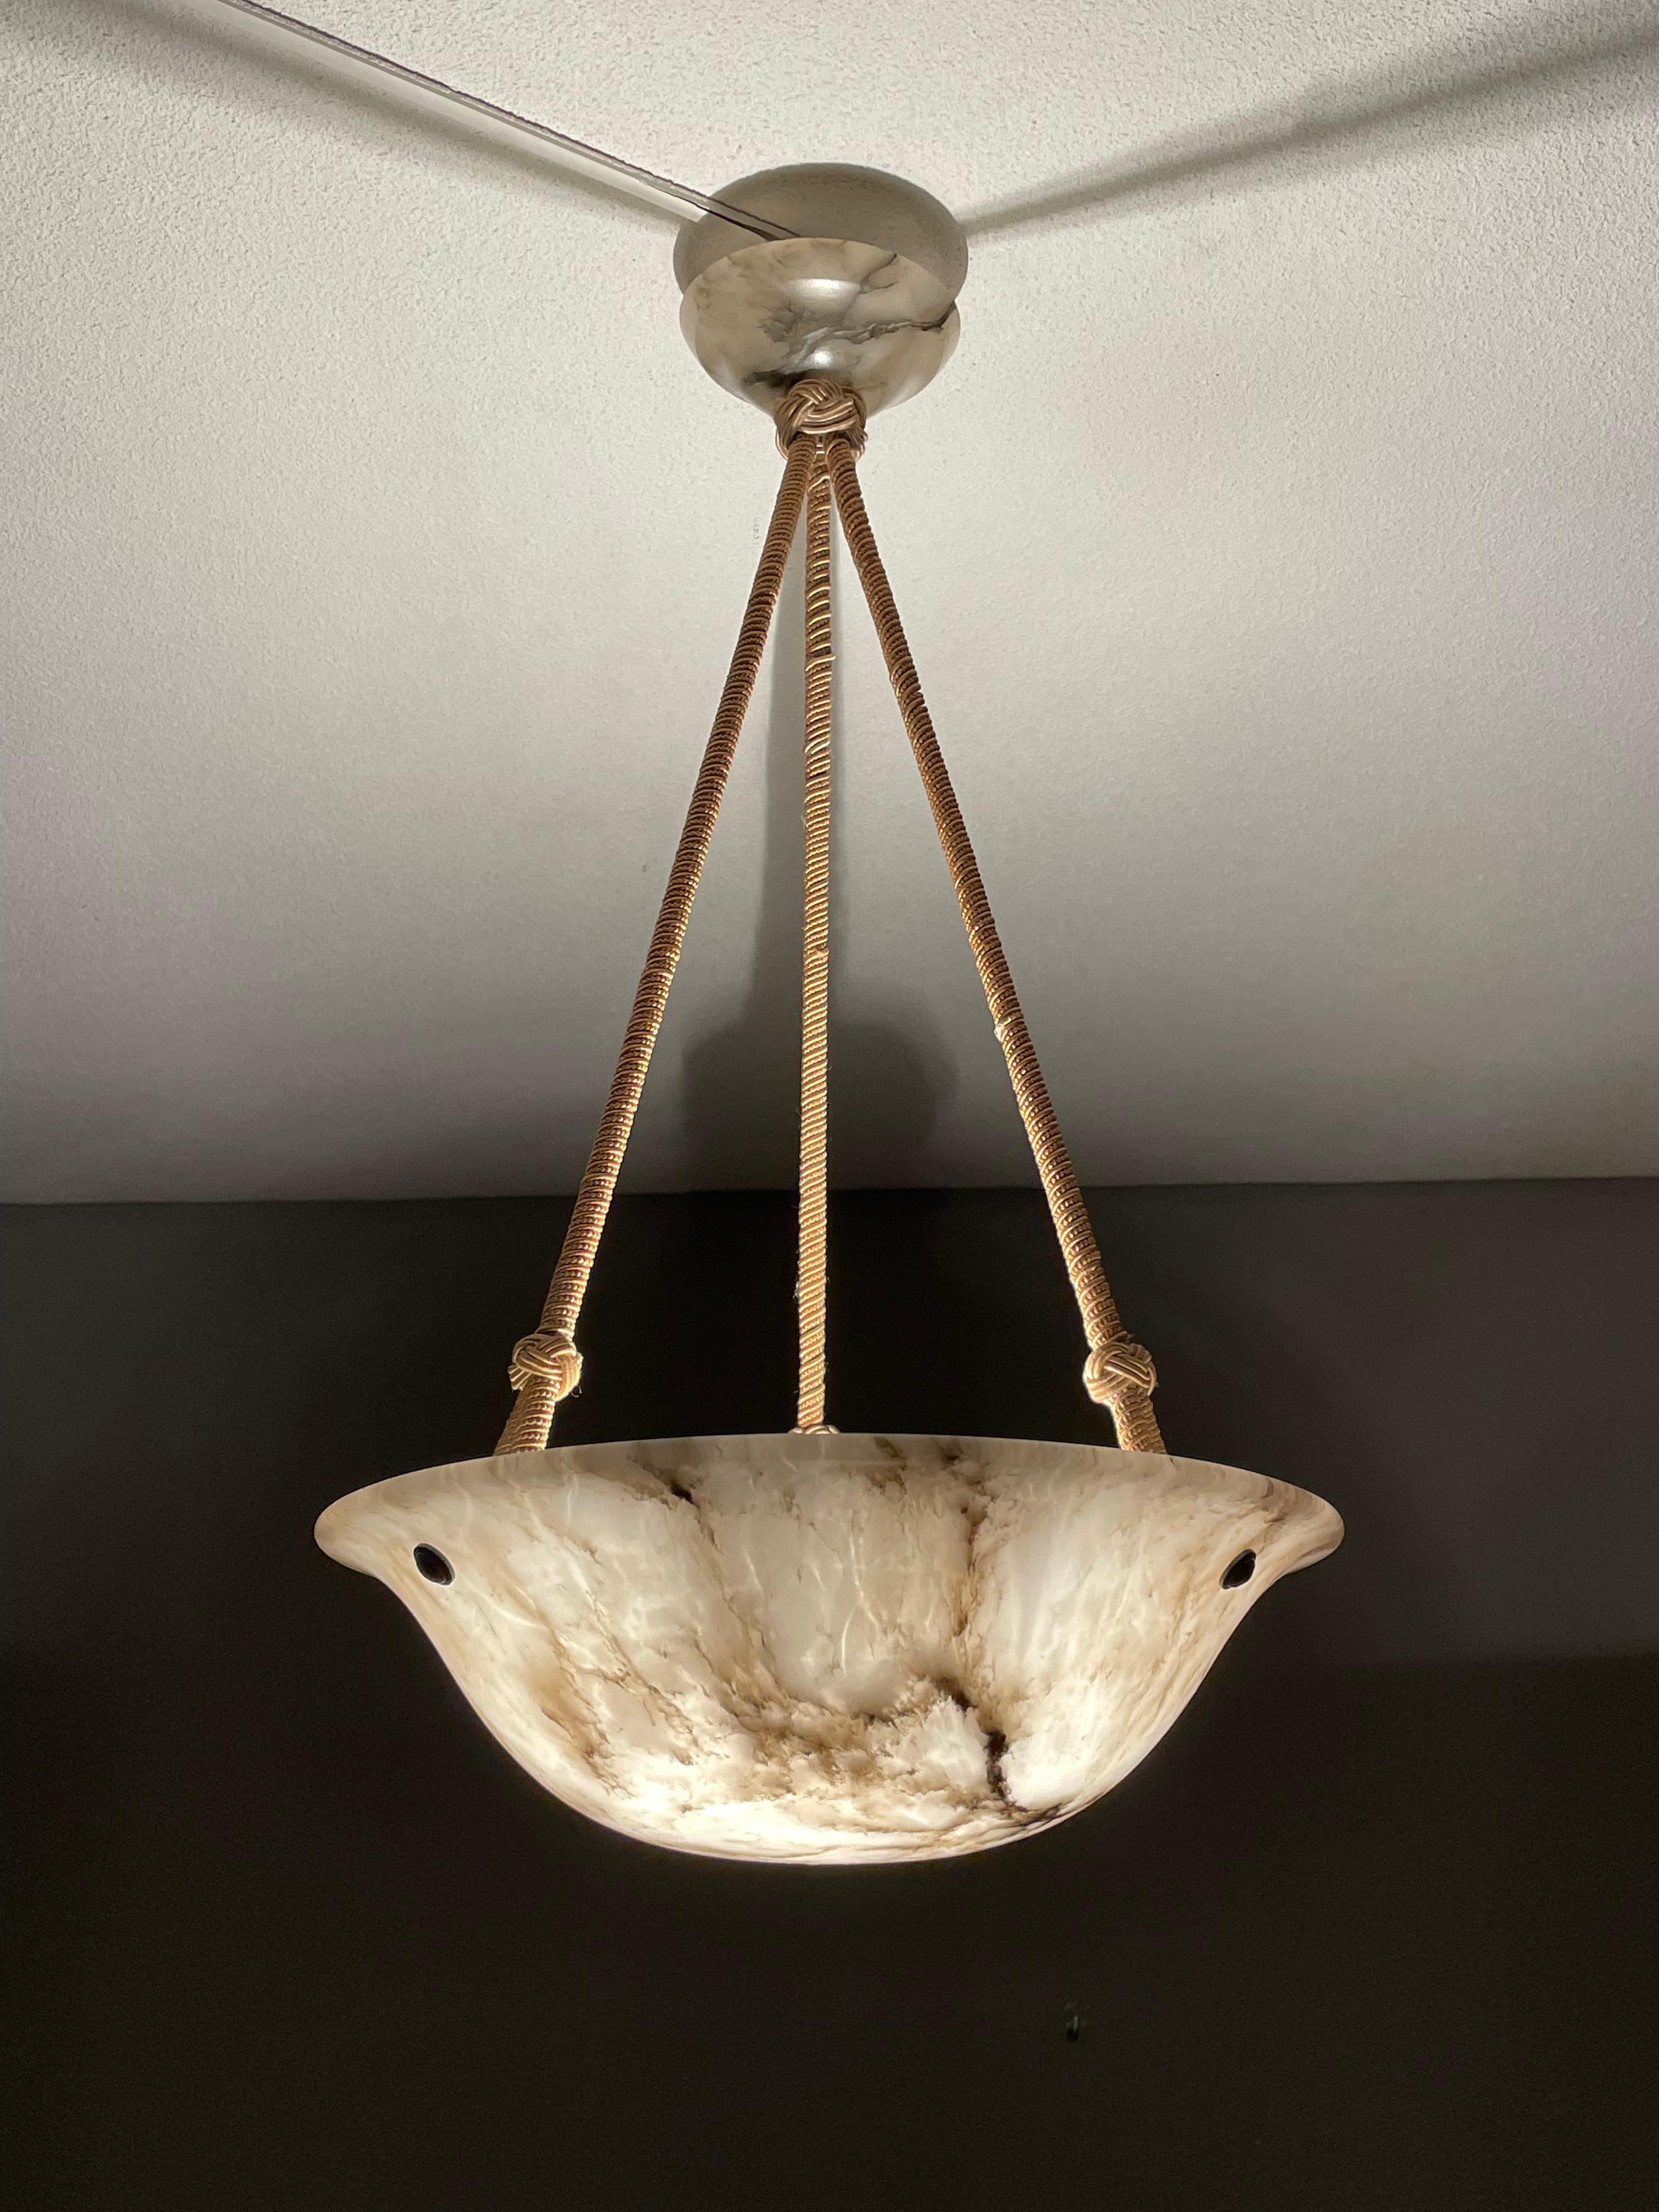 Exceptional alabaster pendant with a perfect shade and canopy.

Over the years we have seen and sold a number of alabaster pendants that were even better than the top quality ones that we sell regularly and this here specimen too fits that bill.